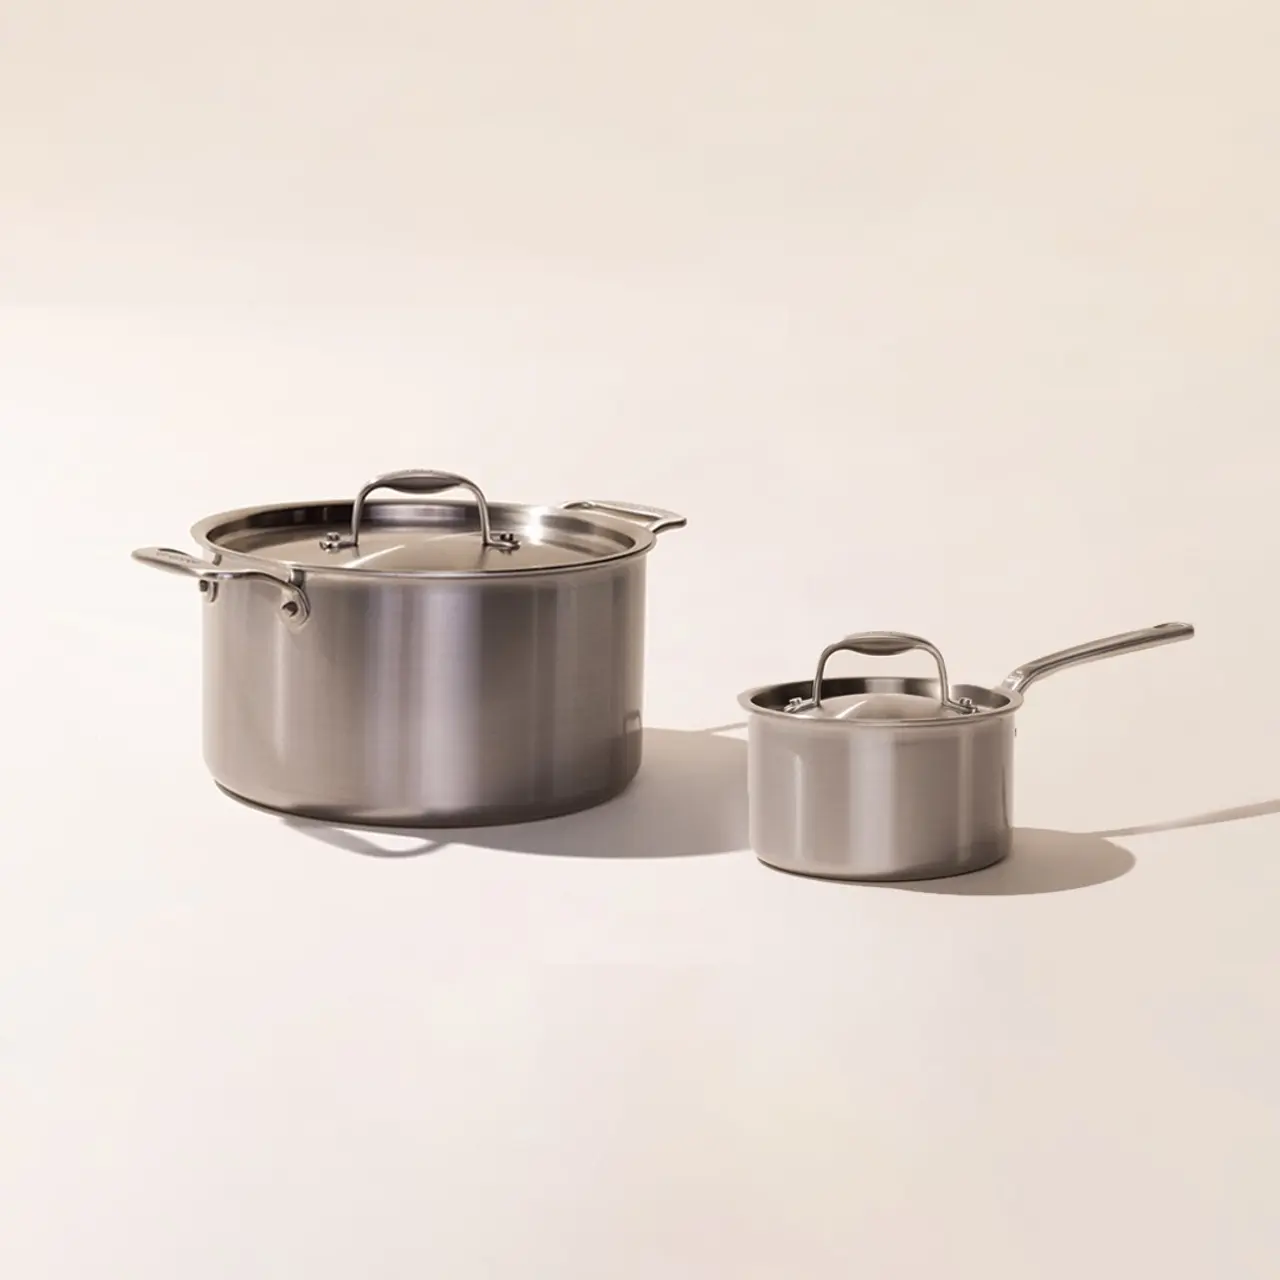 A large stainless steel pot with a lid and a smaller saucepan with a handle, both on a neutral background.